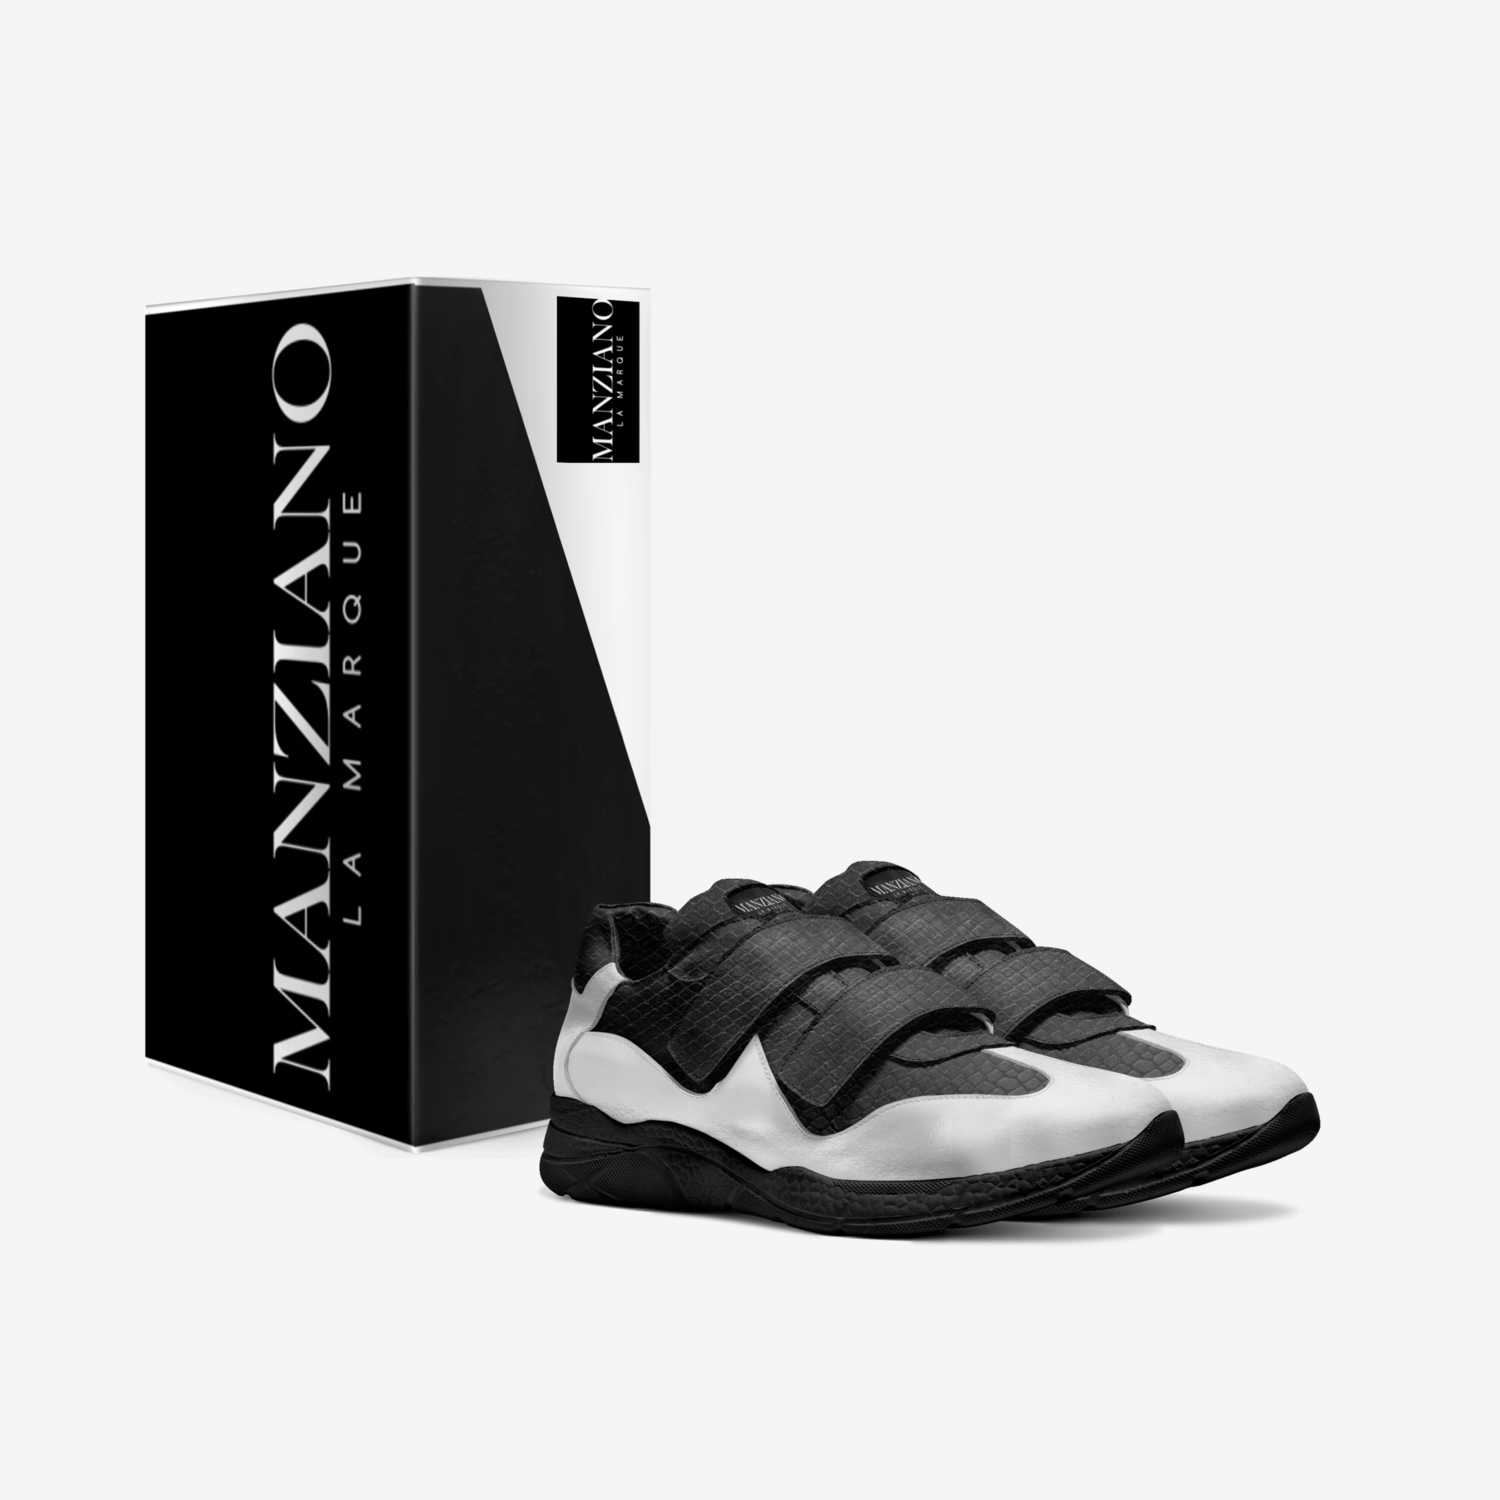 Manziano  custom made in Italy shoes by Manzey Miller | Box view